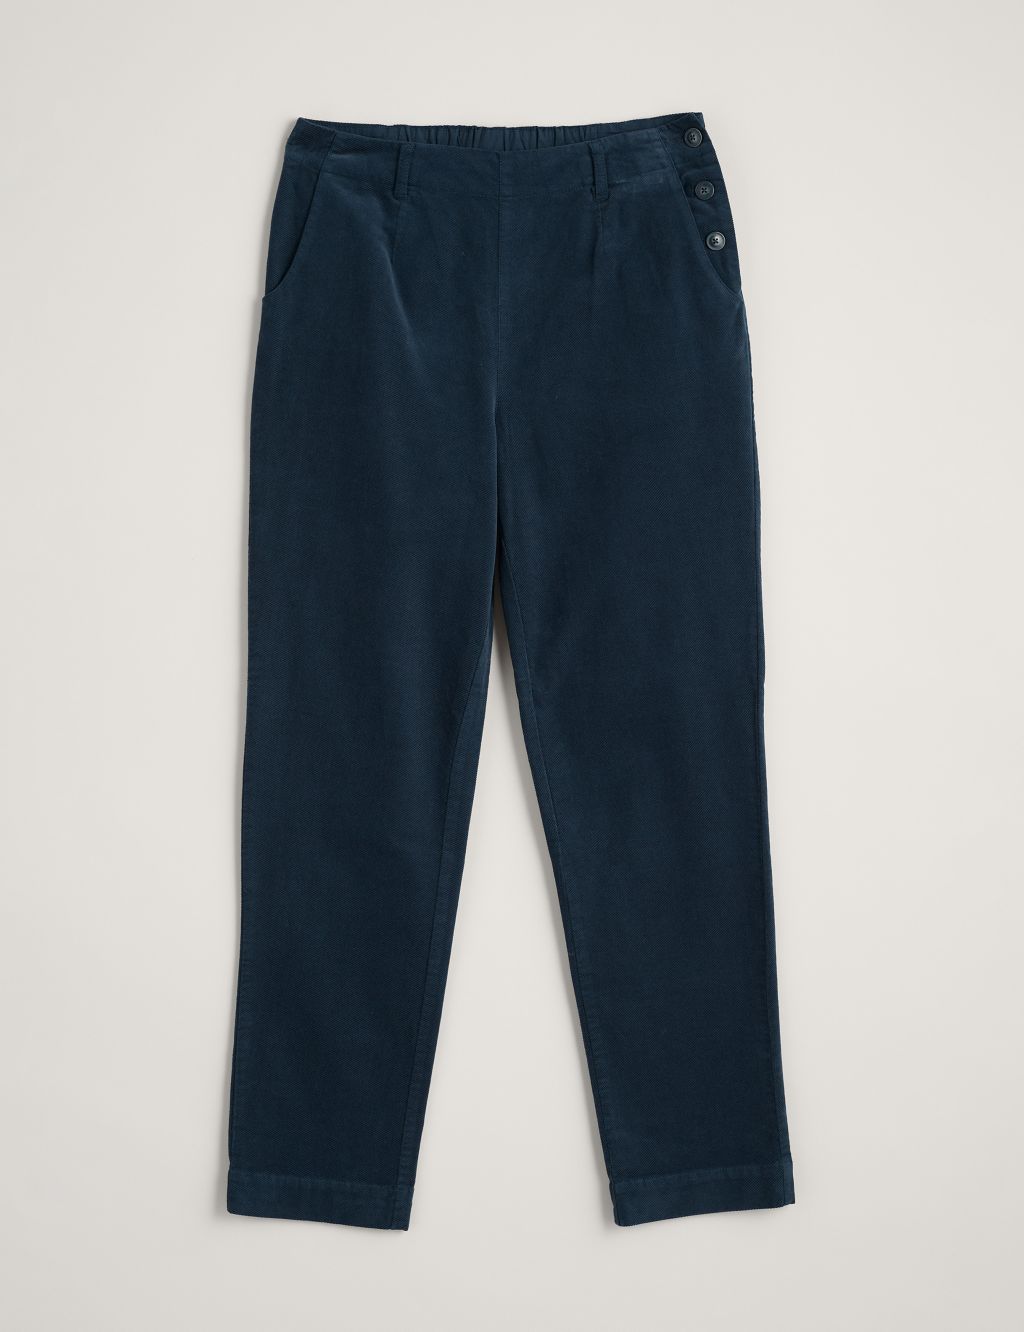 Cotton Rich Tapered Ankle Grazer Trousers image 2